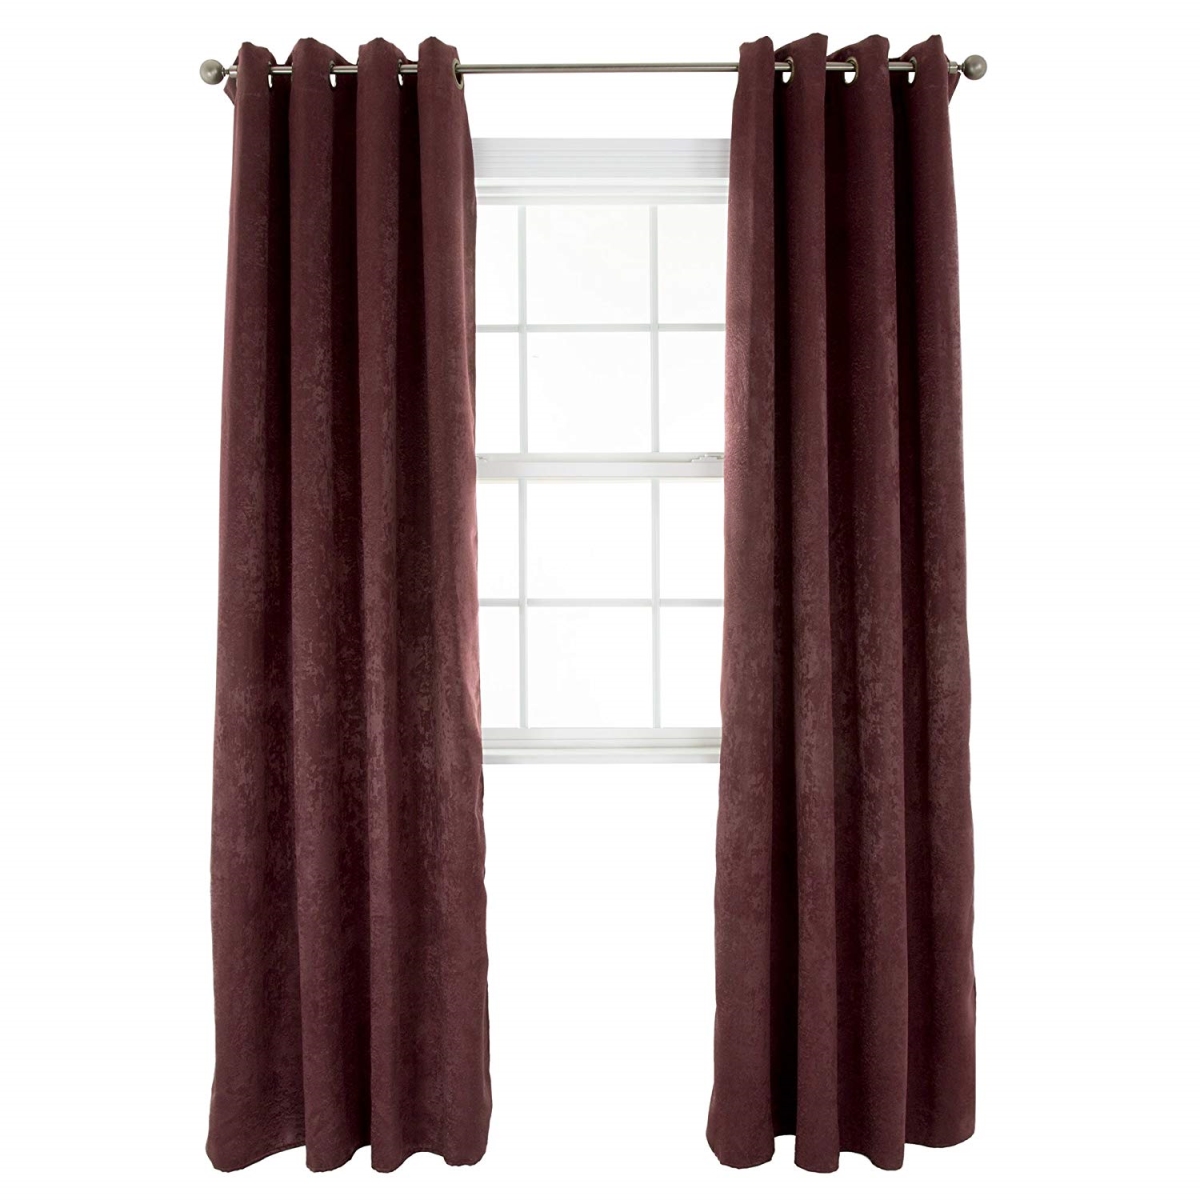 63a-43770 Mila Black Out Curtain Panel, Bordeaux - 84 In.